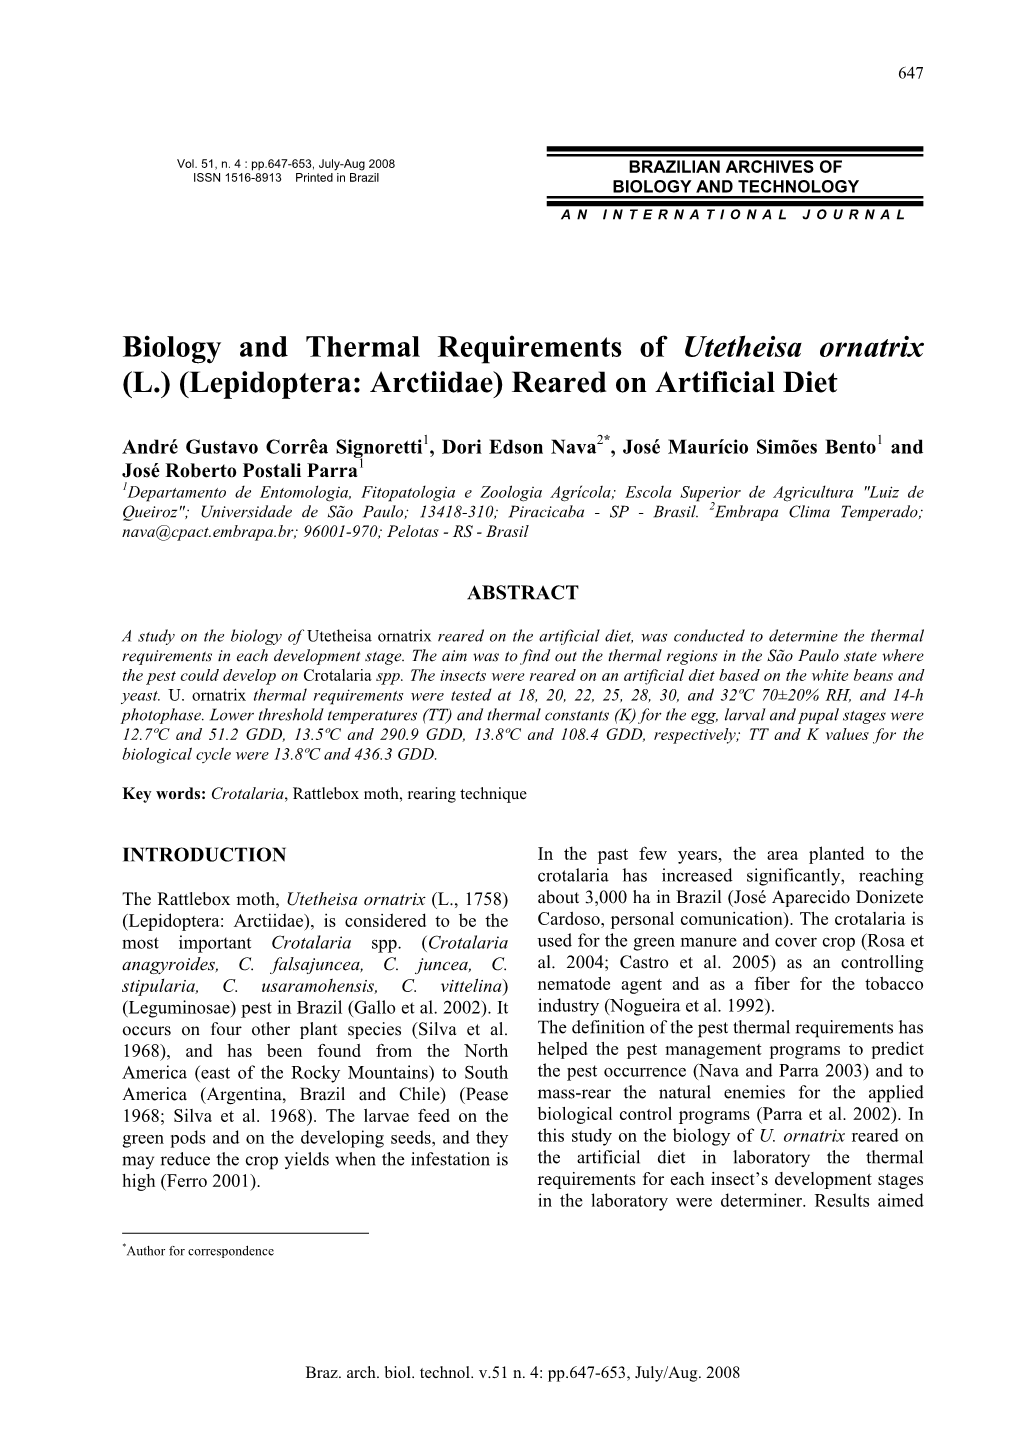 Biology and Thermal Requirements of Utetheisa Ornatrix (L.) (Lepidoptera: Arctiidae) Reared on Artificial Diet